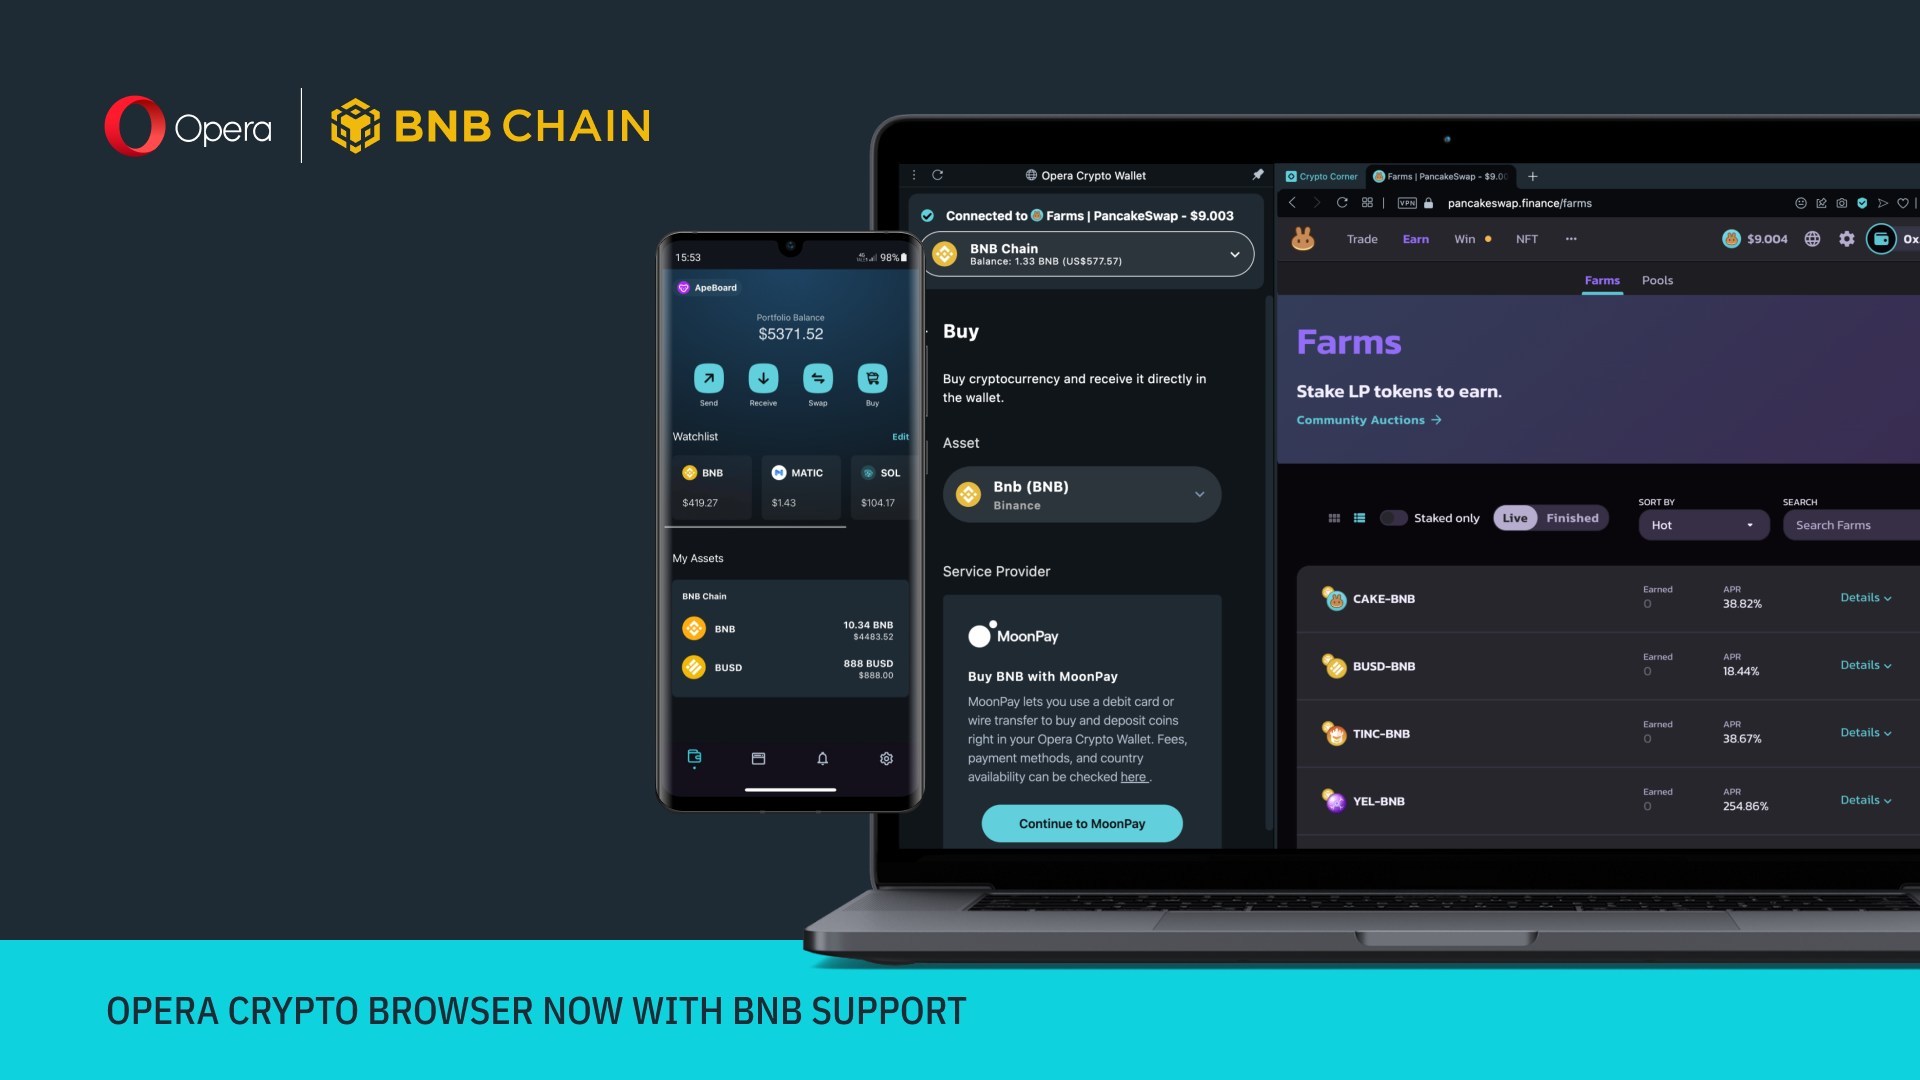 Opera Crypto Browser Integrates BNB Chain and Unlocks Access to Its Ecosystem of dApps